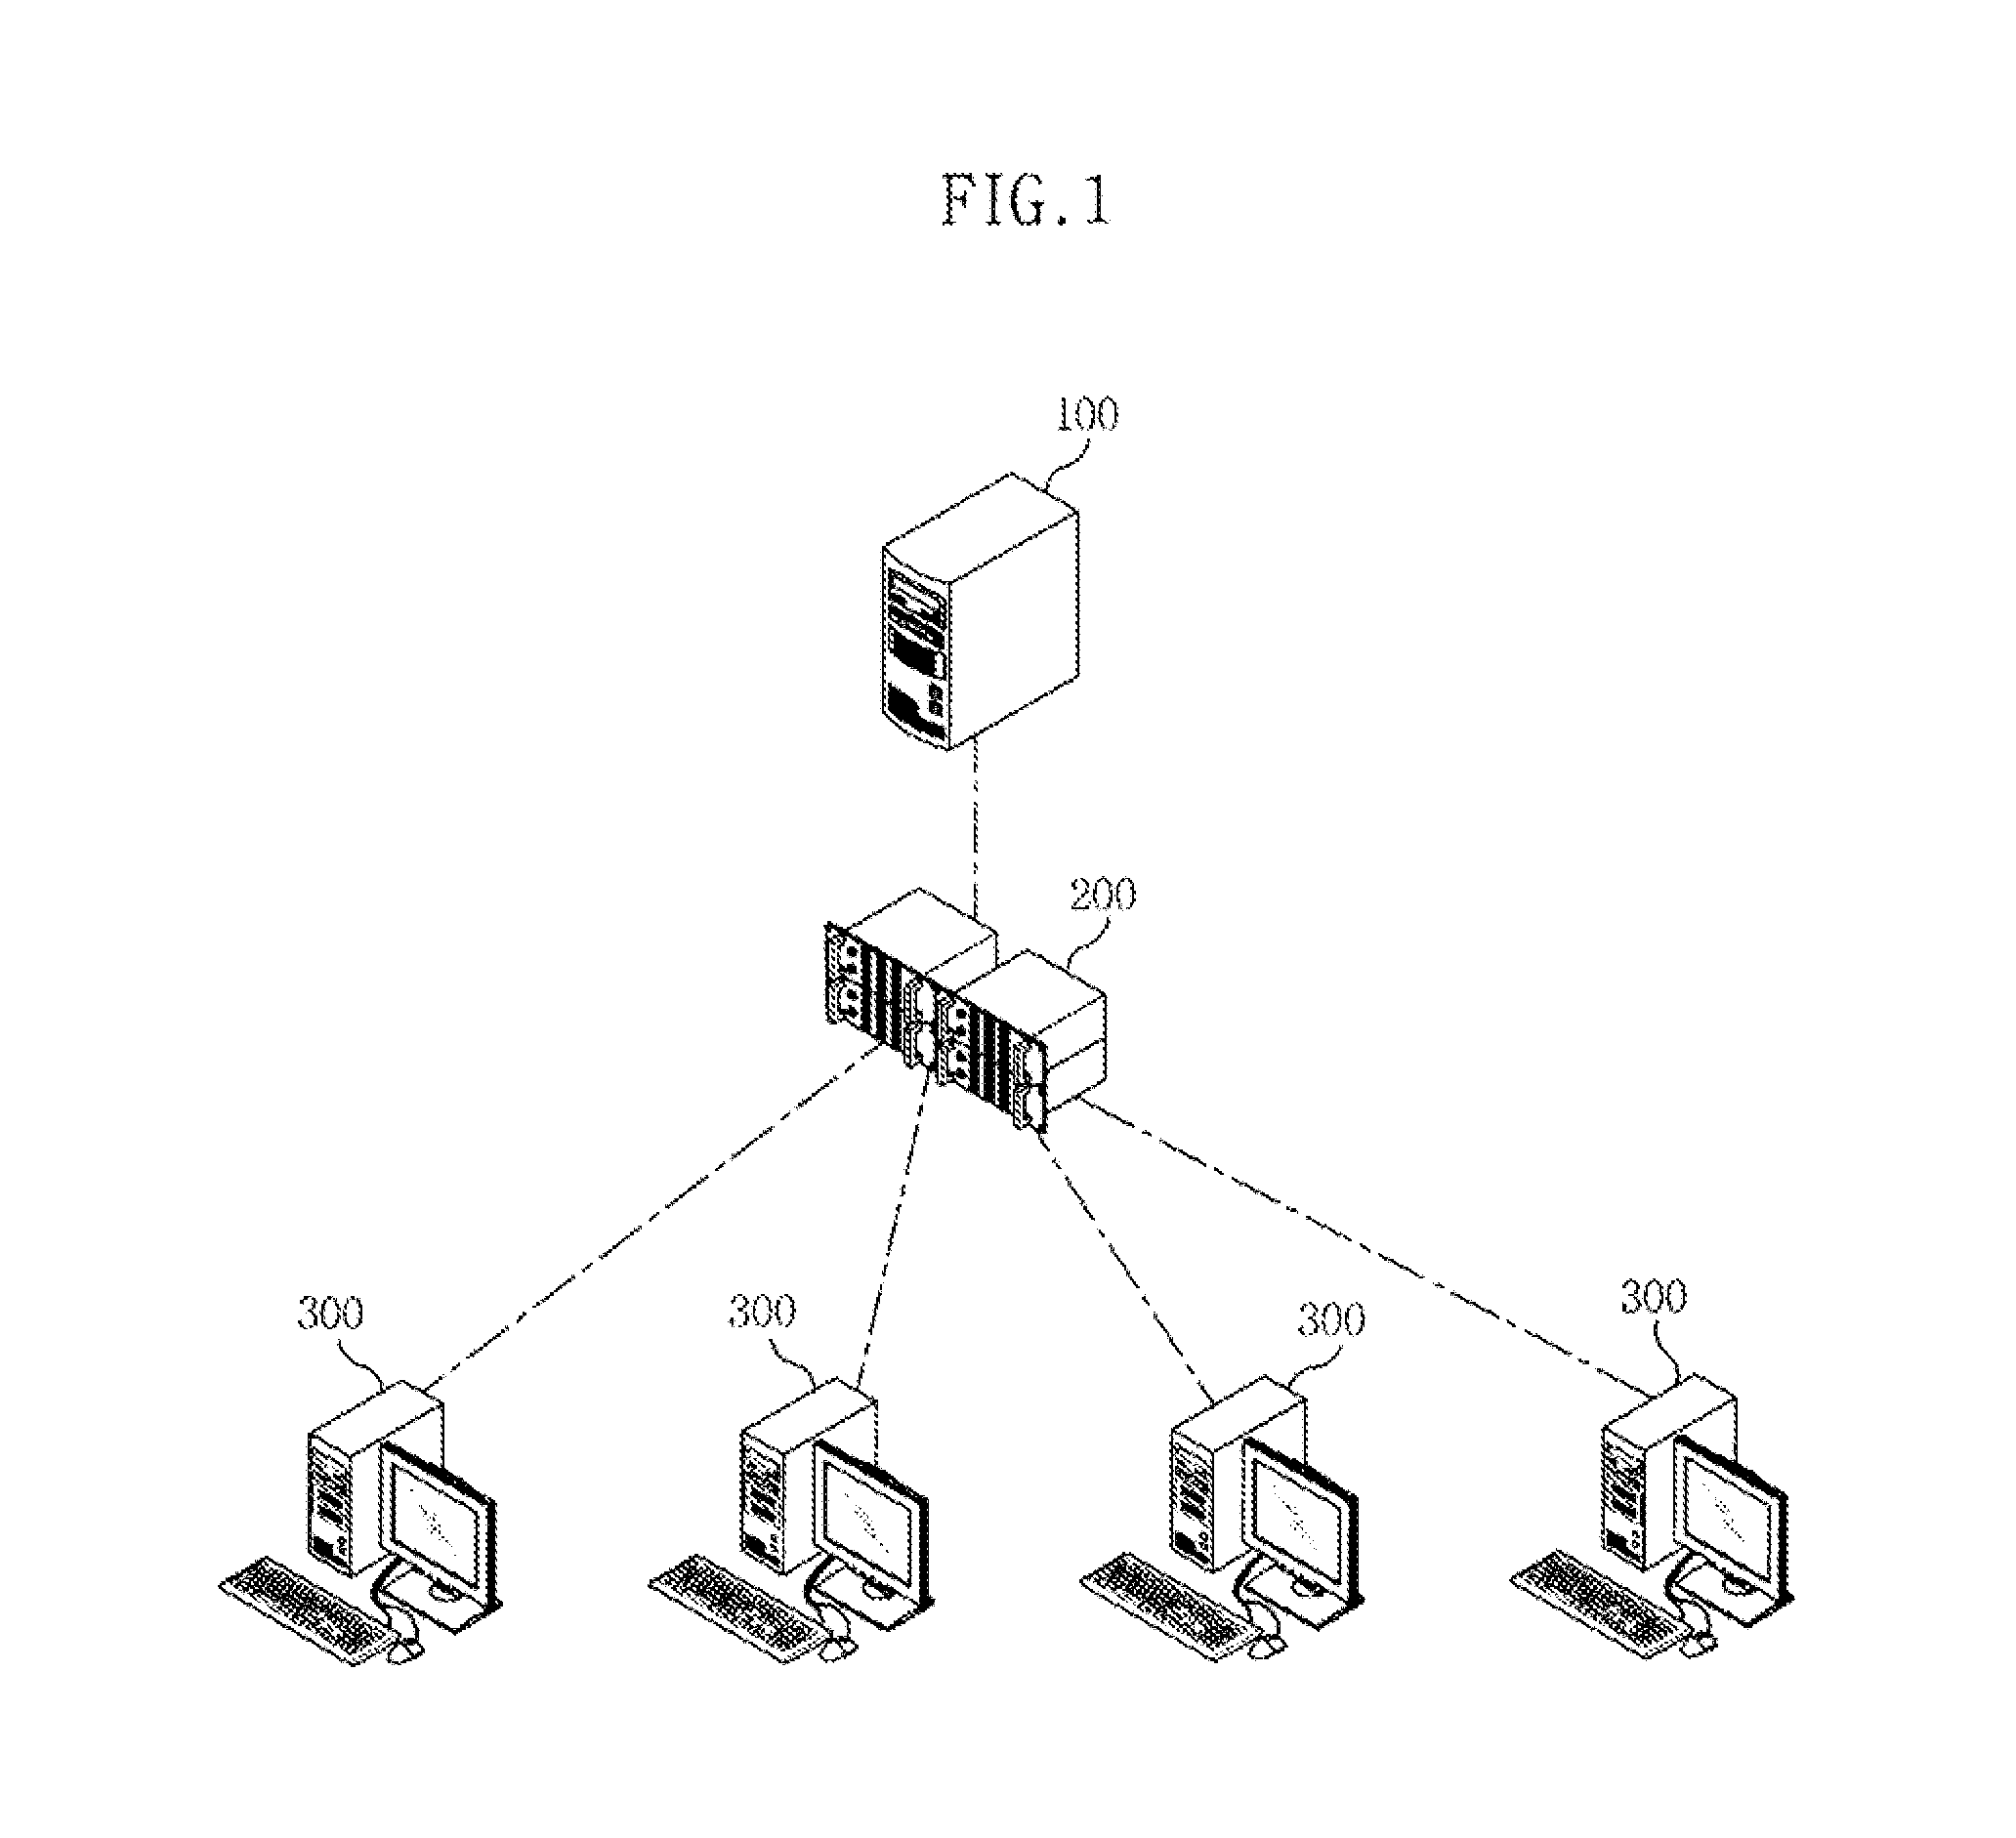 Apparatus and method for preventing falsification of client screen